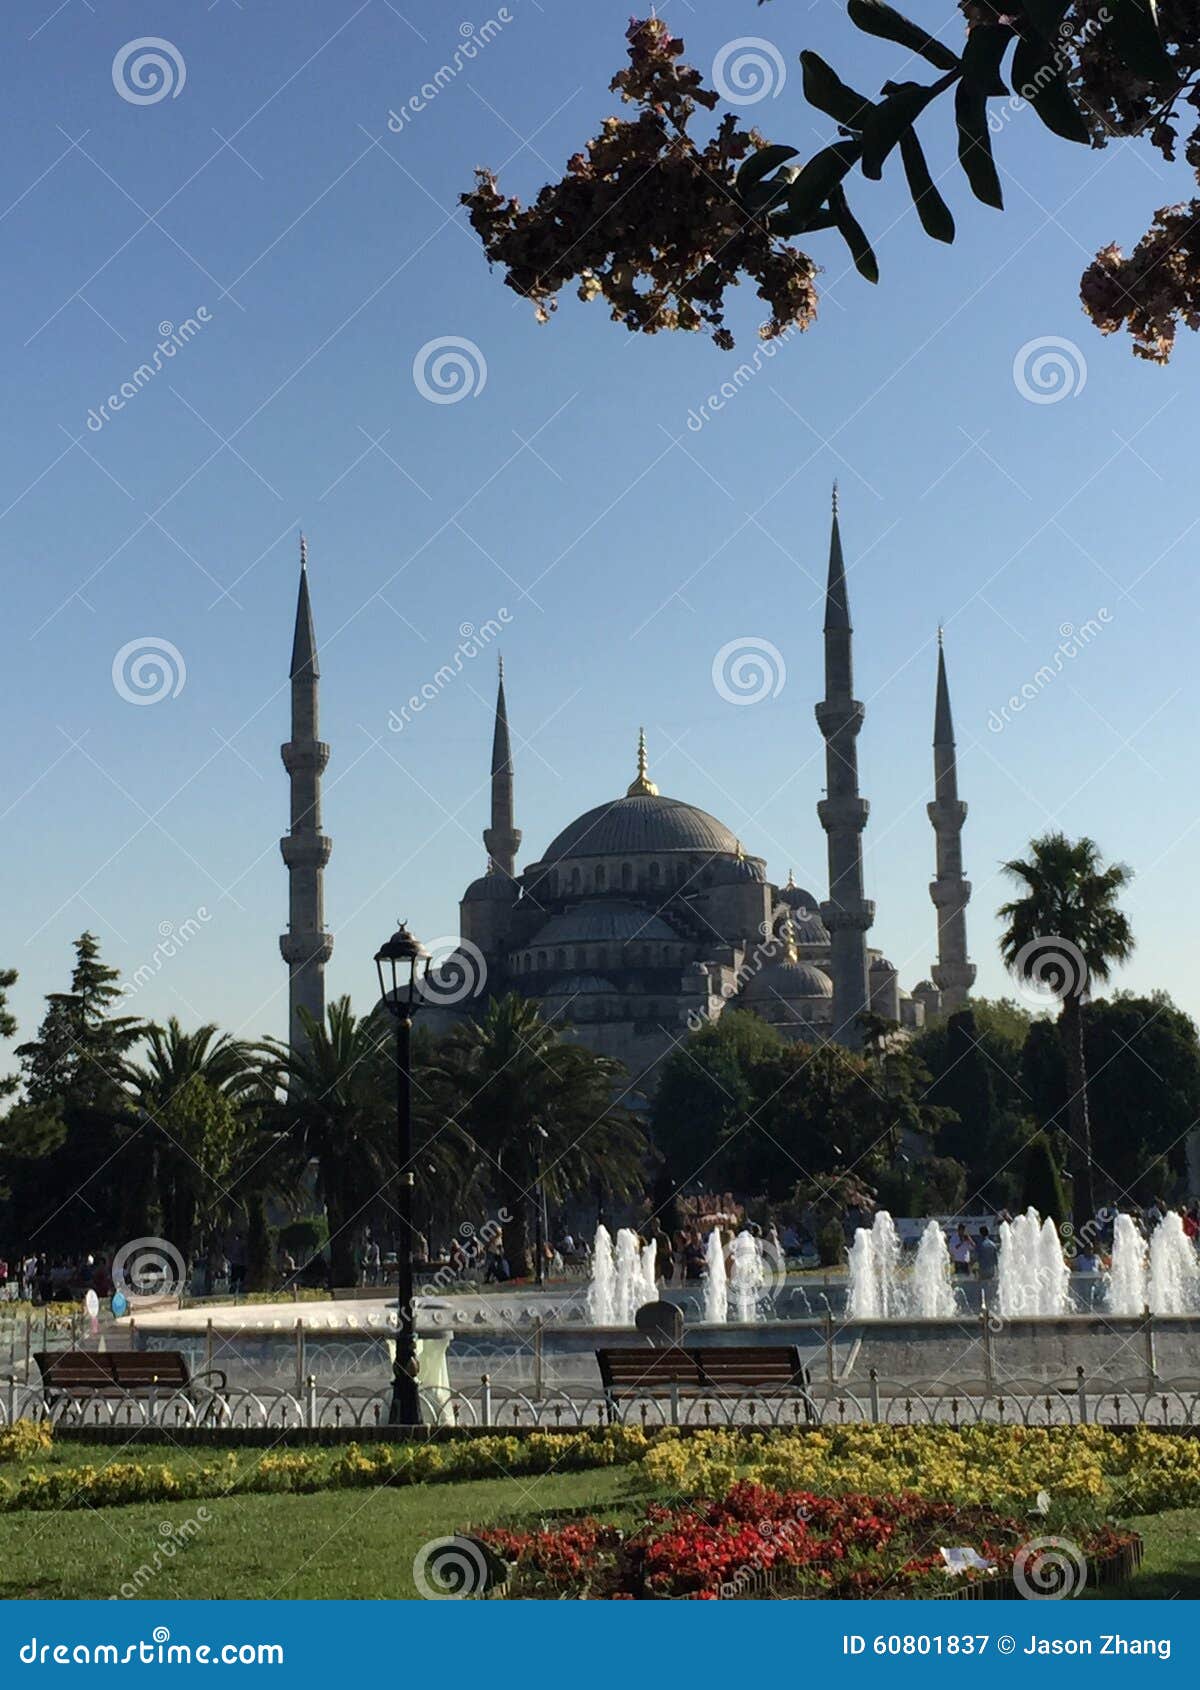 sultanahmed - the blue mosque in instanbul